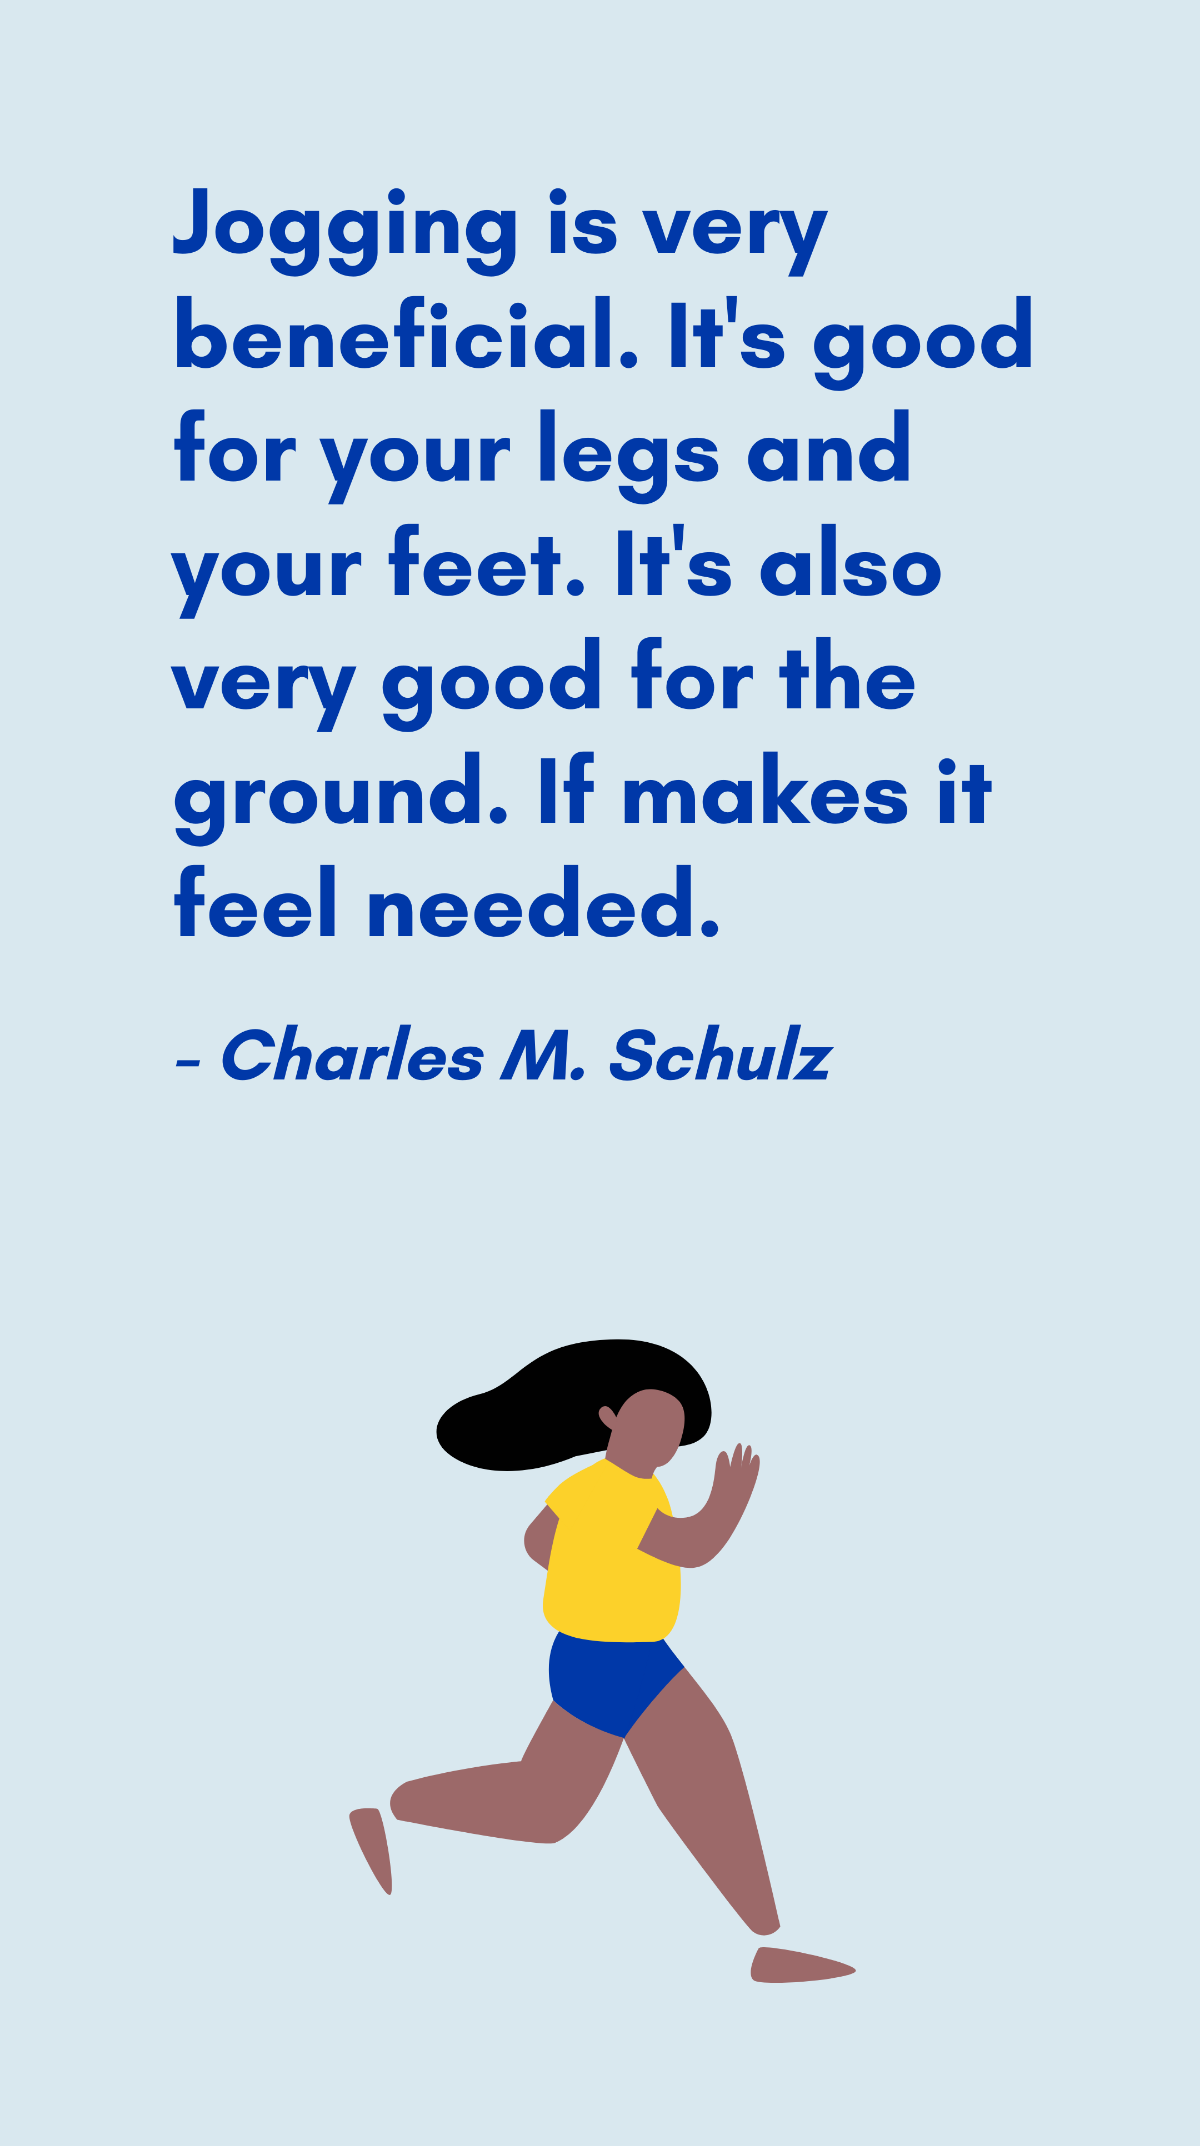 Charles M. Schulz - Jogging is very beneficial. It's good for your legs and your feet. It's also very good for the ground. If makes it feel needed.